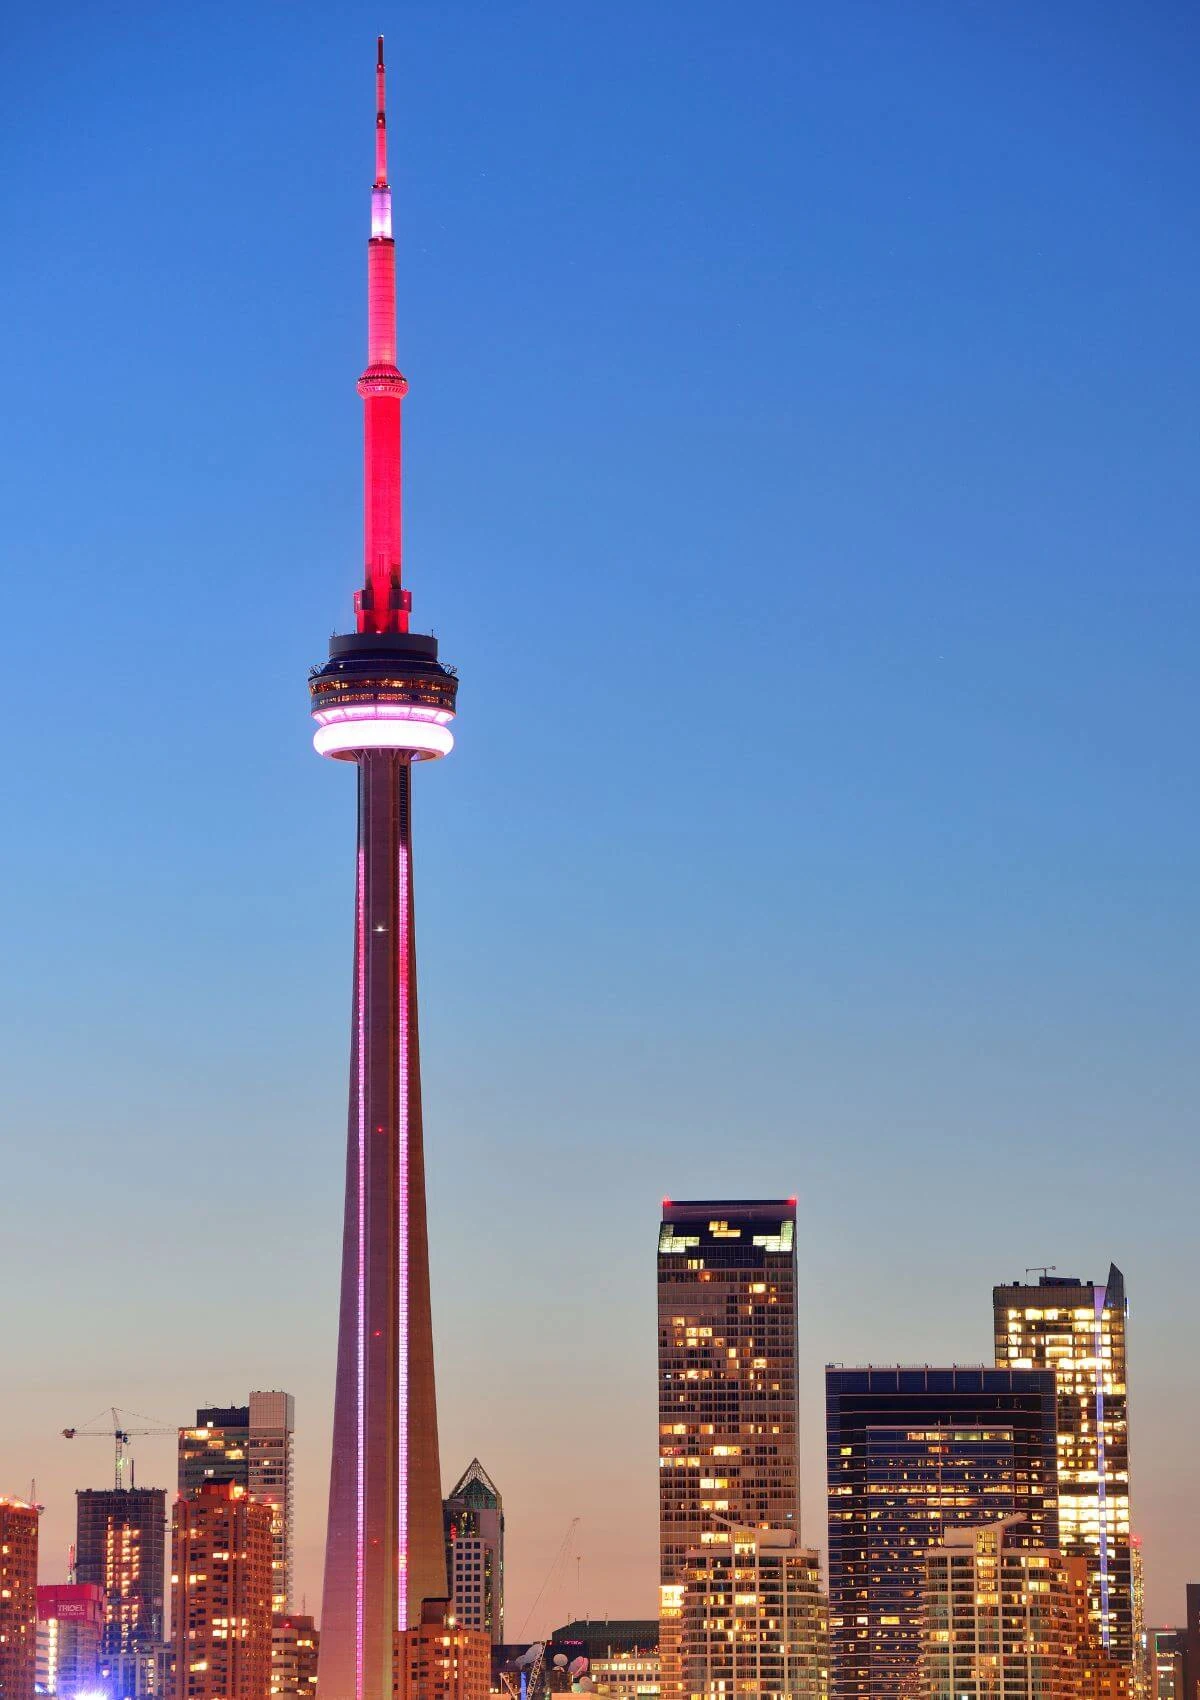 Canada is famous for the CN Tower